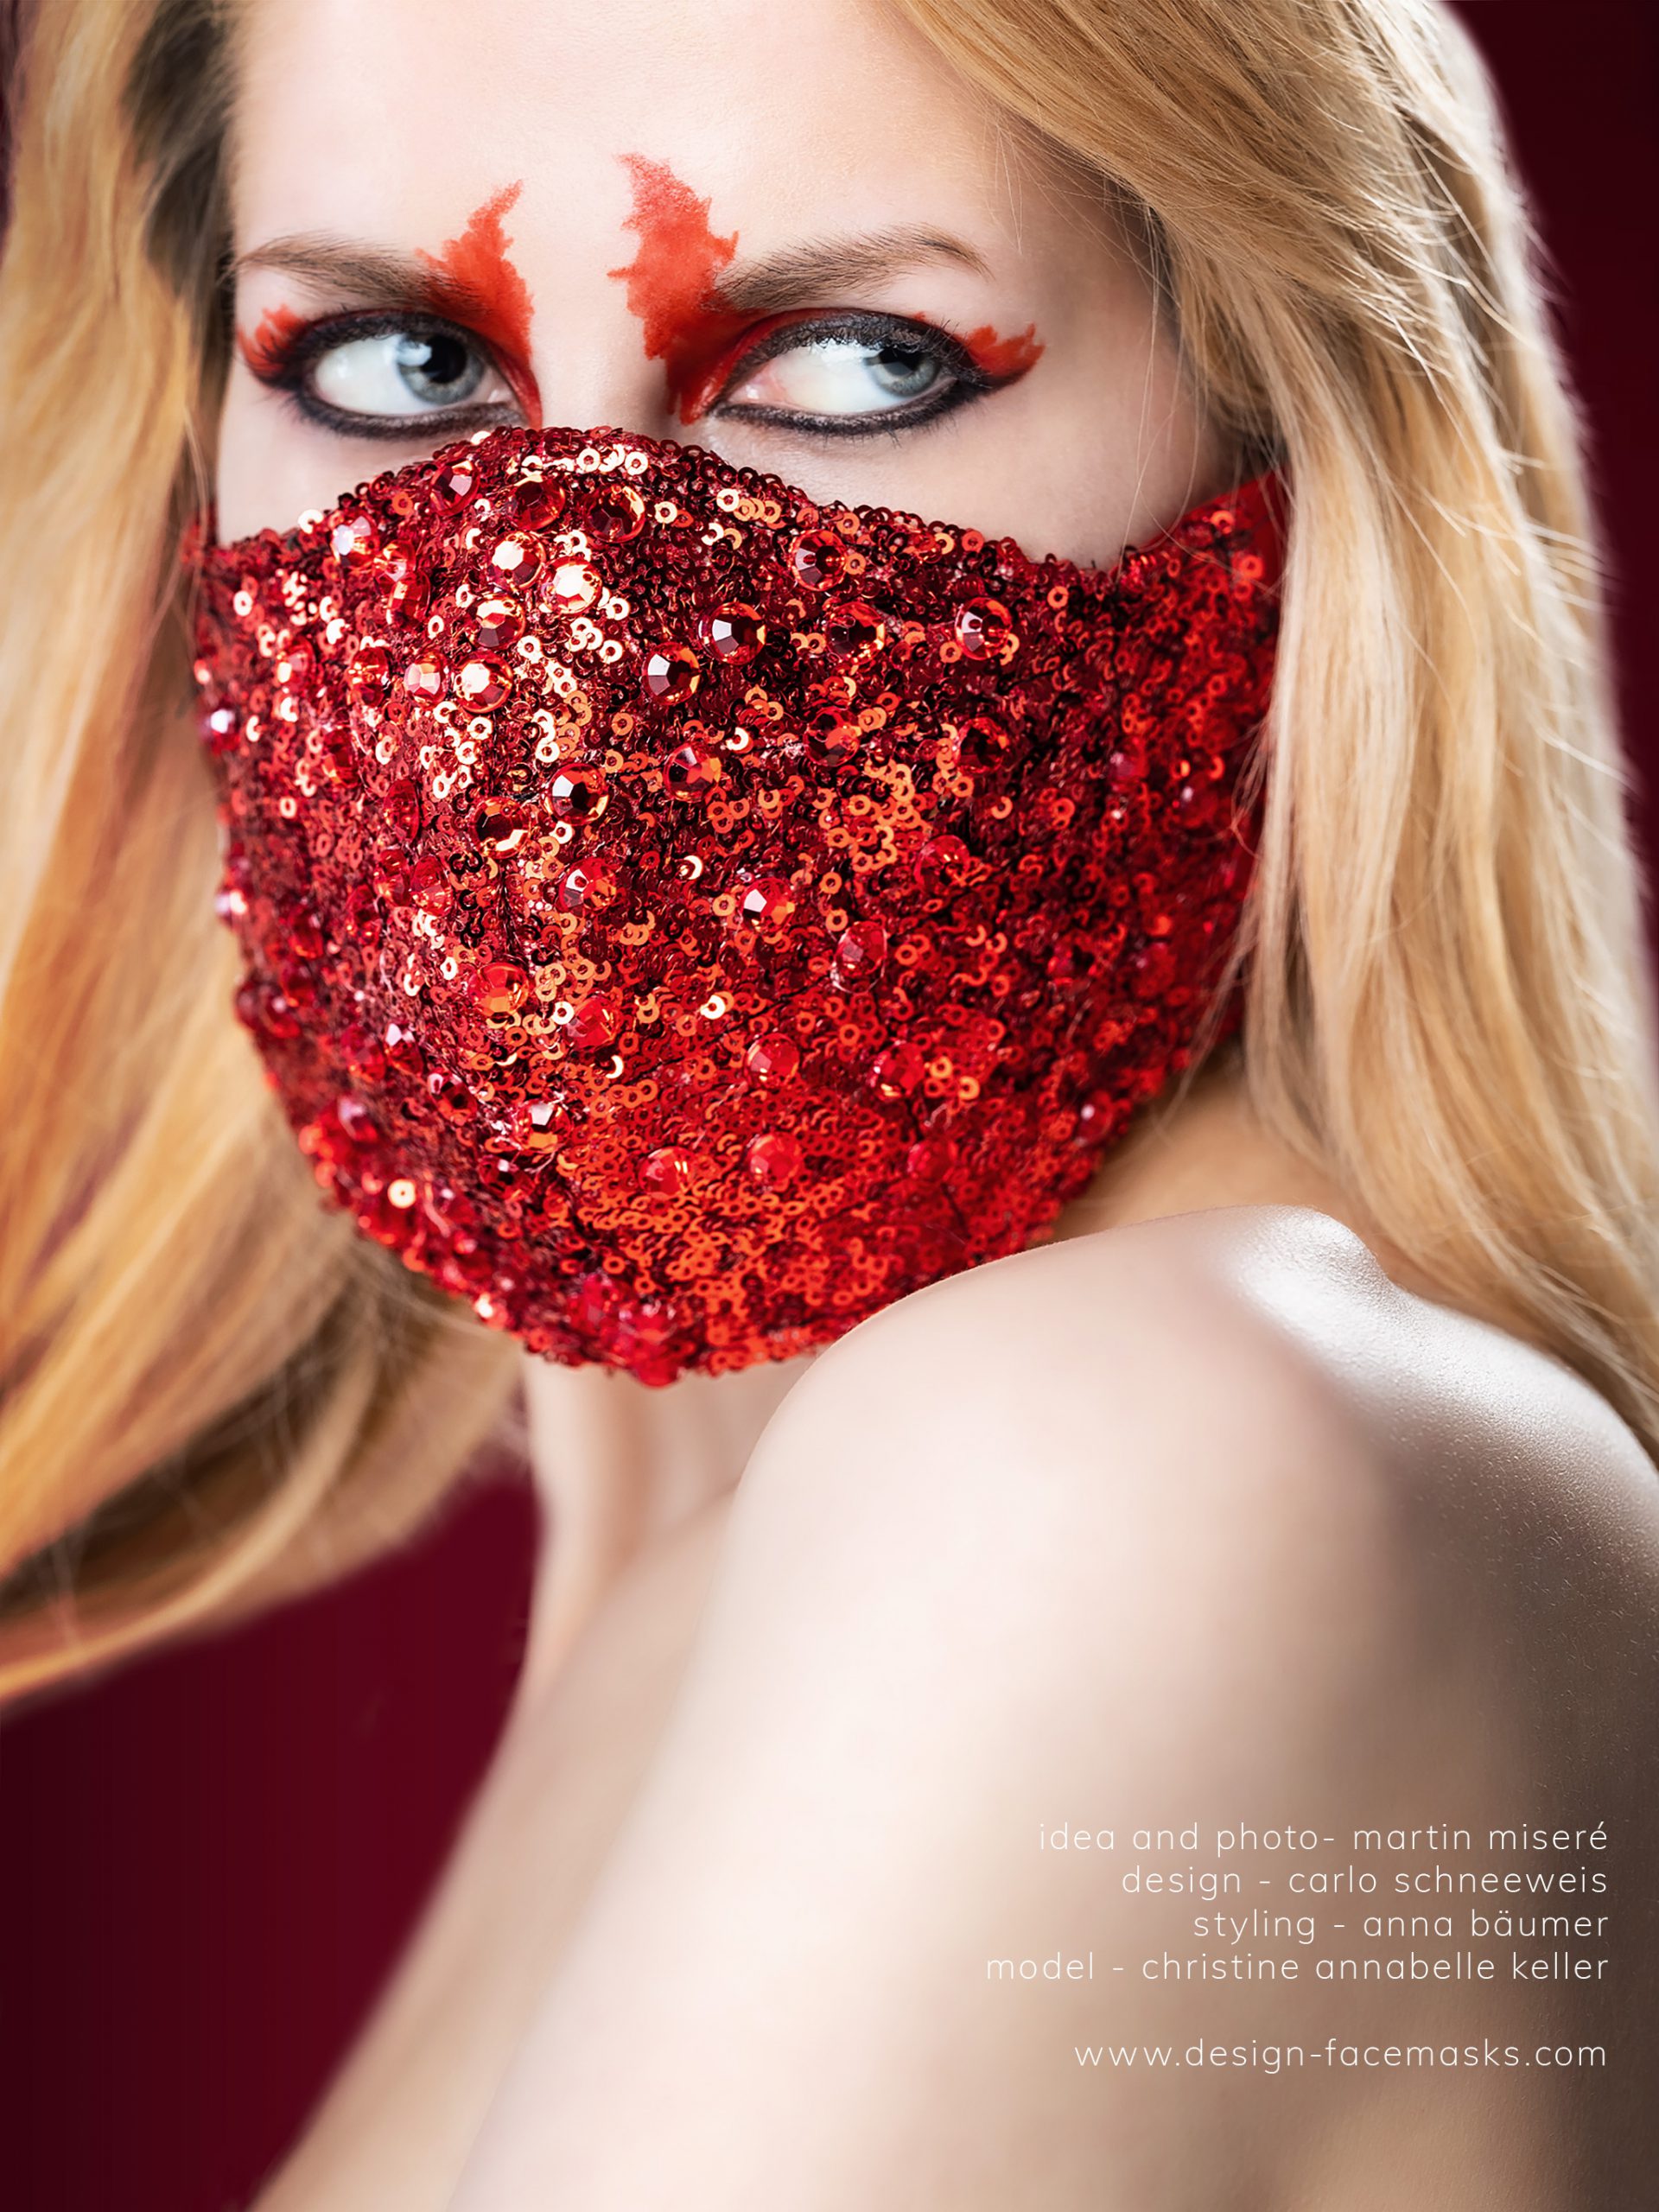 Design Facemask Model Christine Annabelle Keller wearing facemask of fashion designer Carlo Schneeweis photographed by Martin Misere